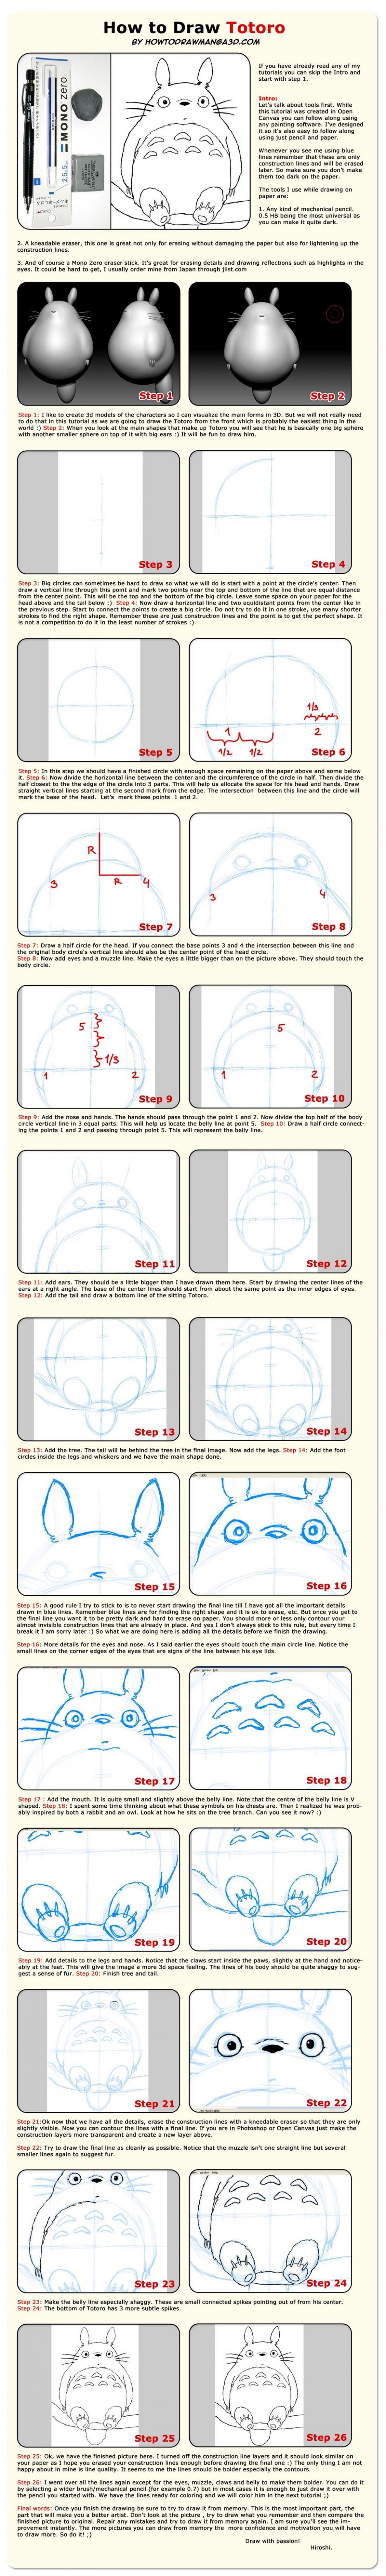 Image from How to draw Manga Tutorials - how_to_draw_totoro.jpg